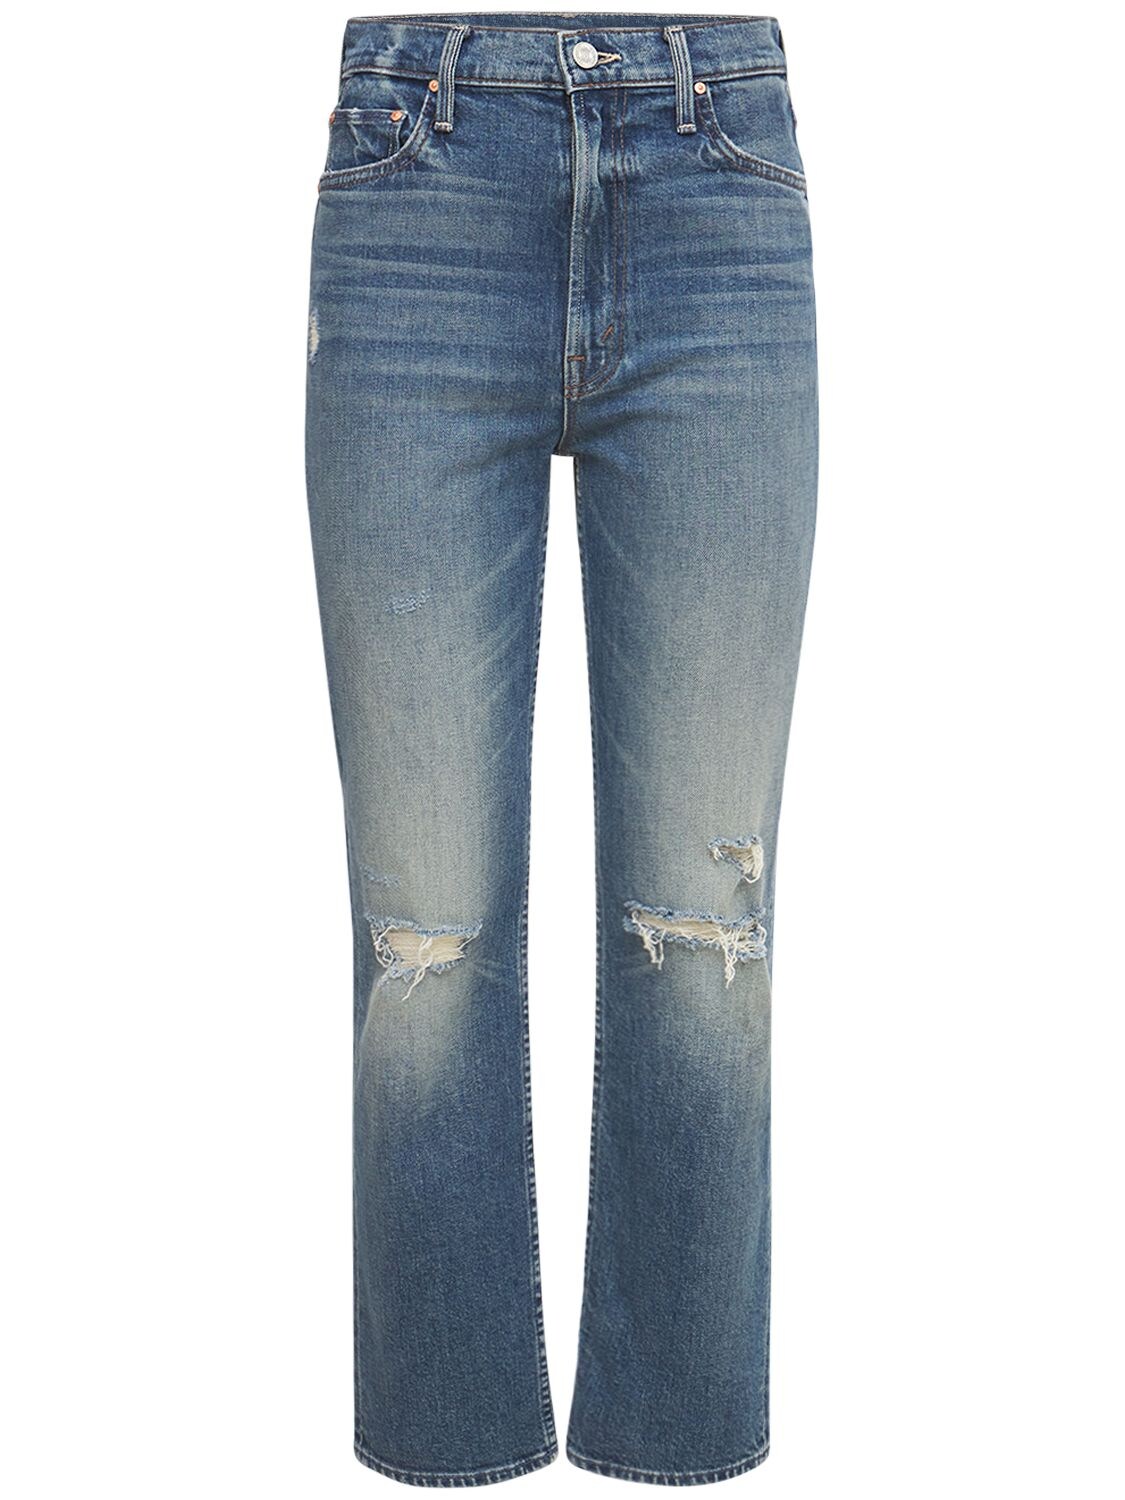 MOTHER Rider High Waisted Ankle Jeans